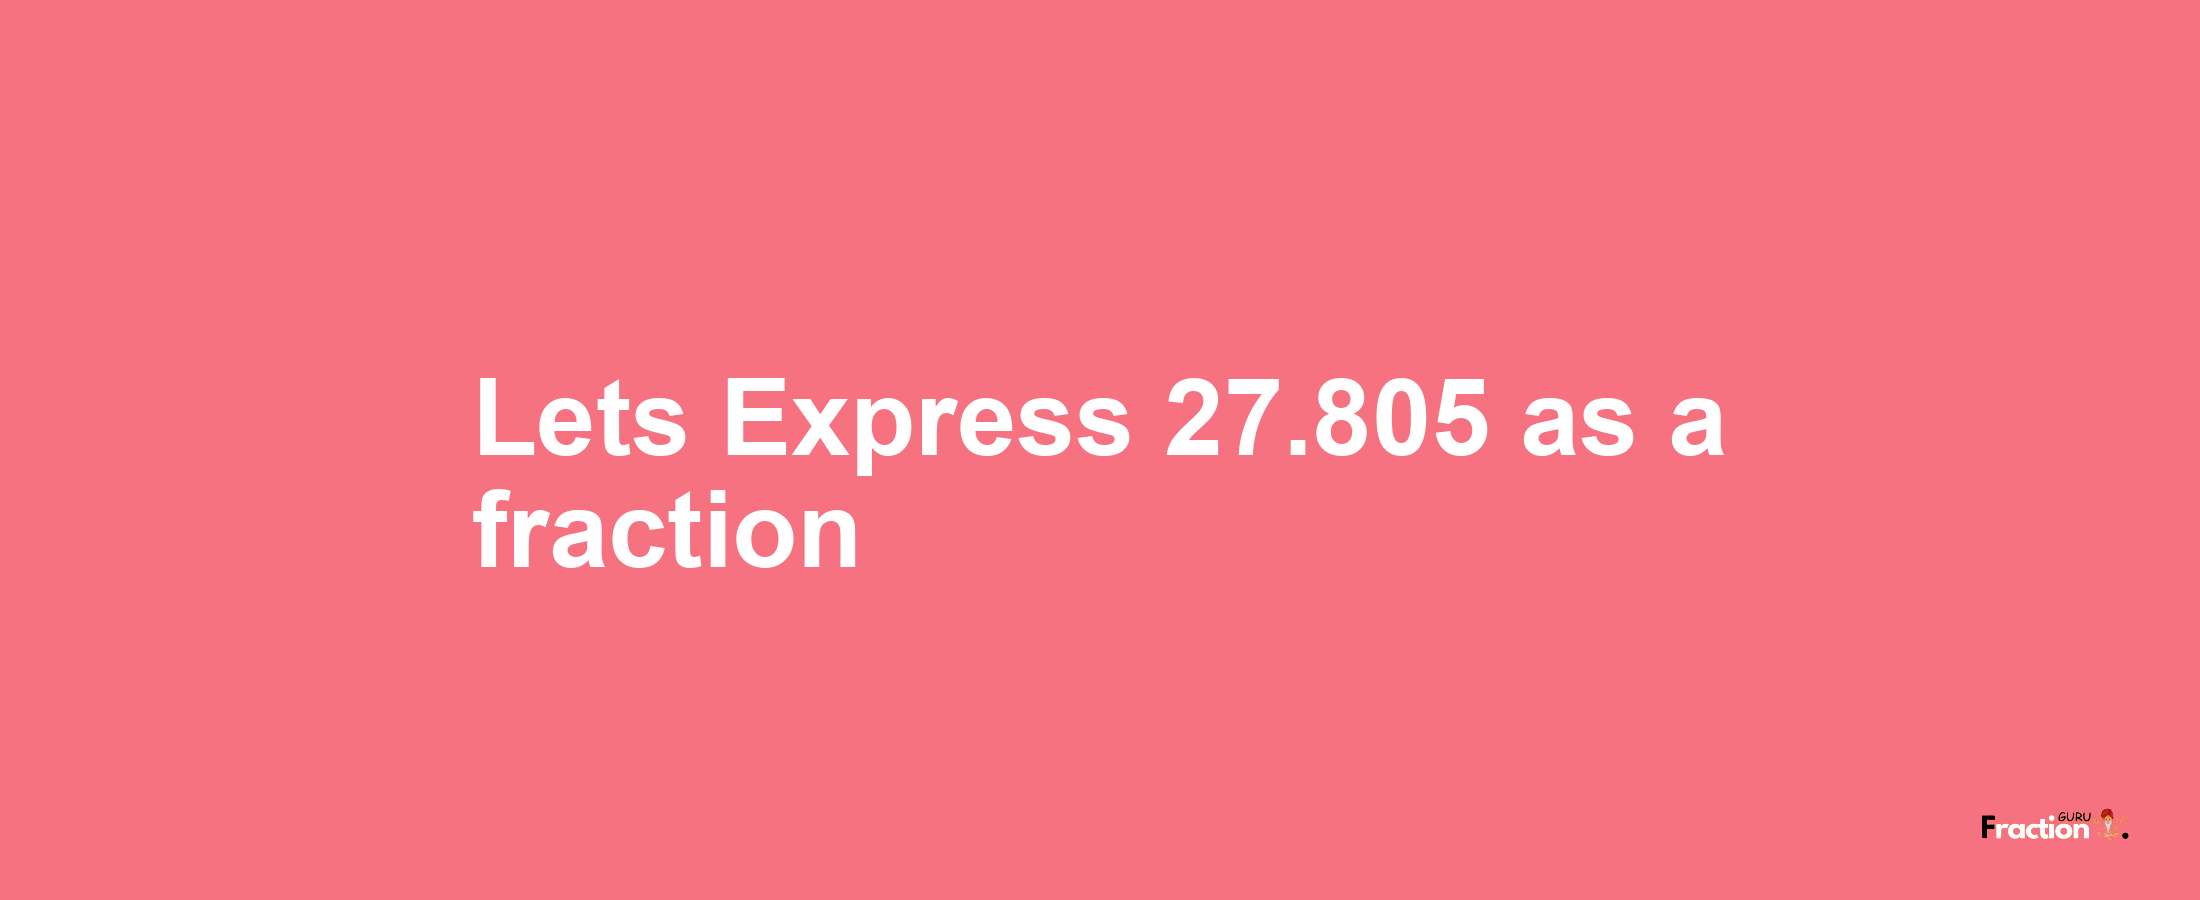 Lets Express 27.805 as afraction